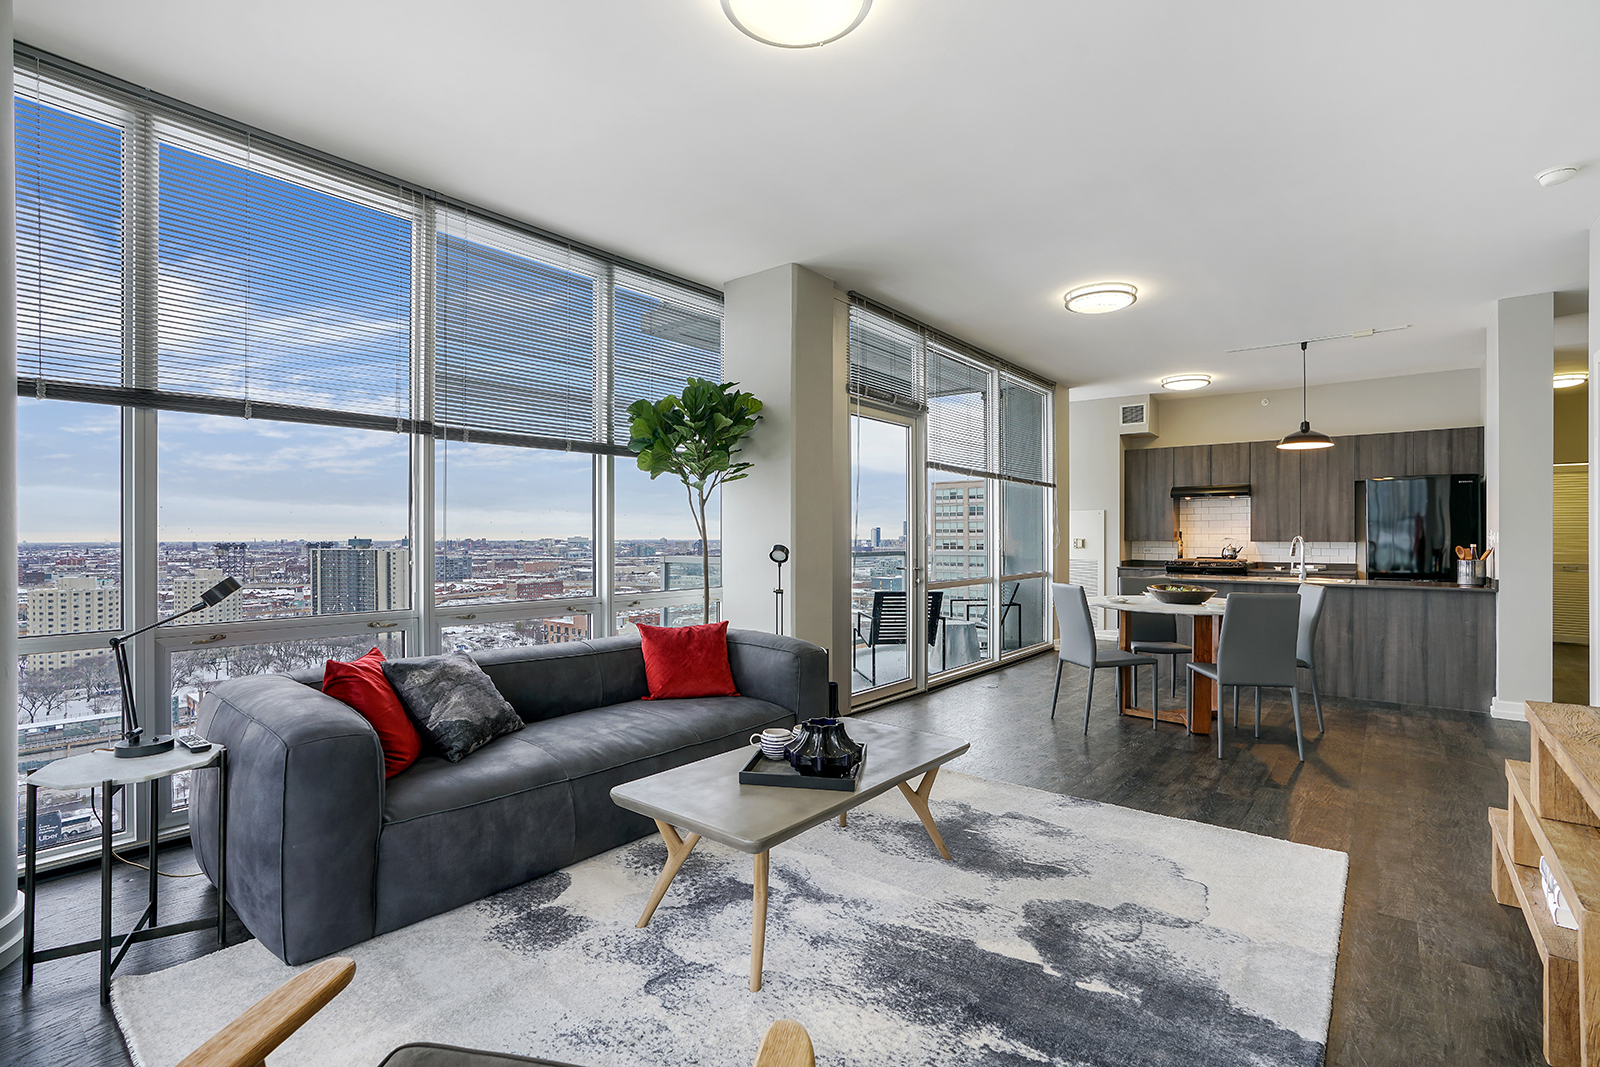 The open-living floor plan at Arrive Lex apartments, with a view of South Loop